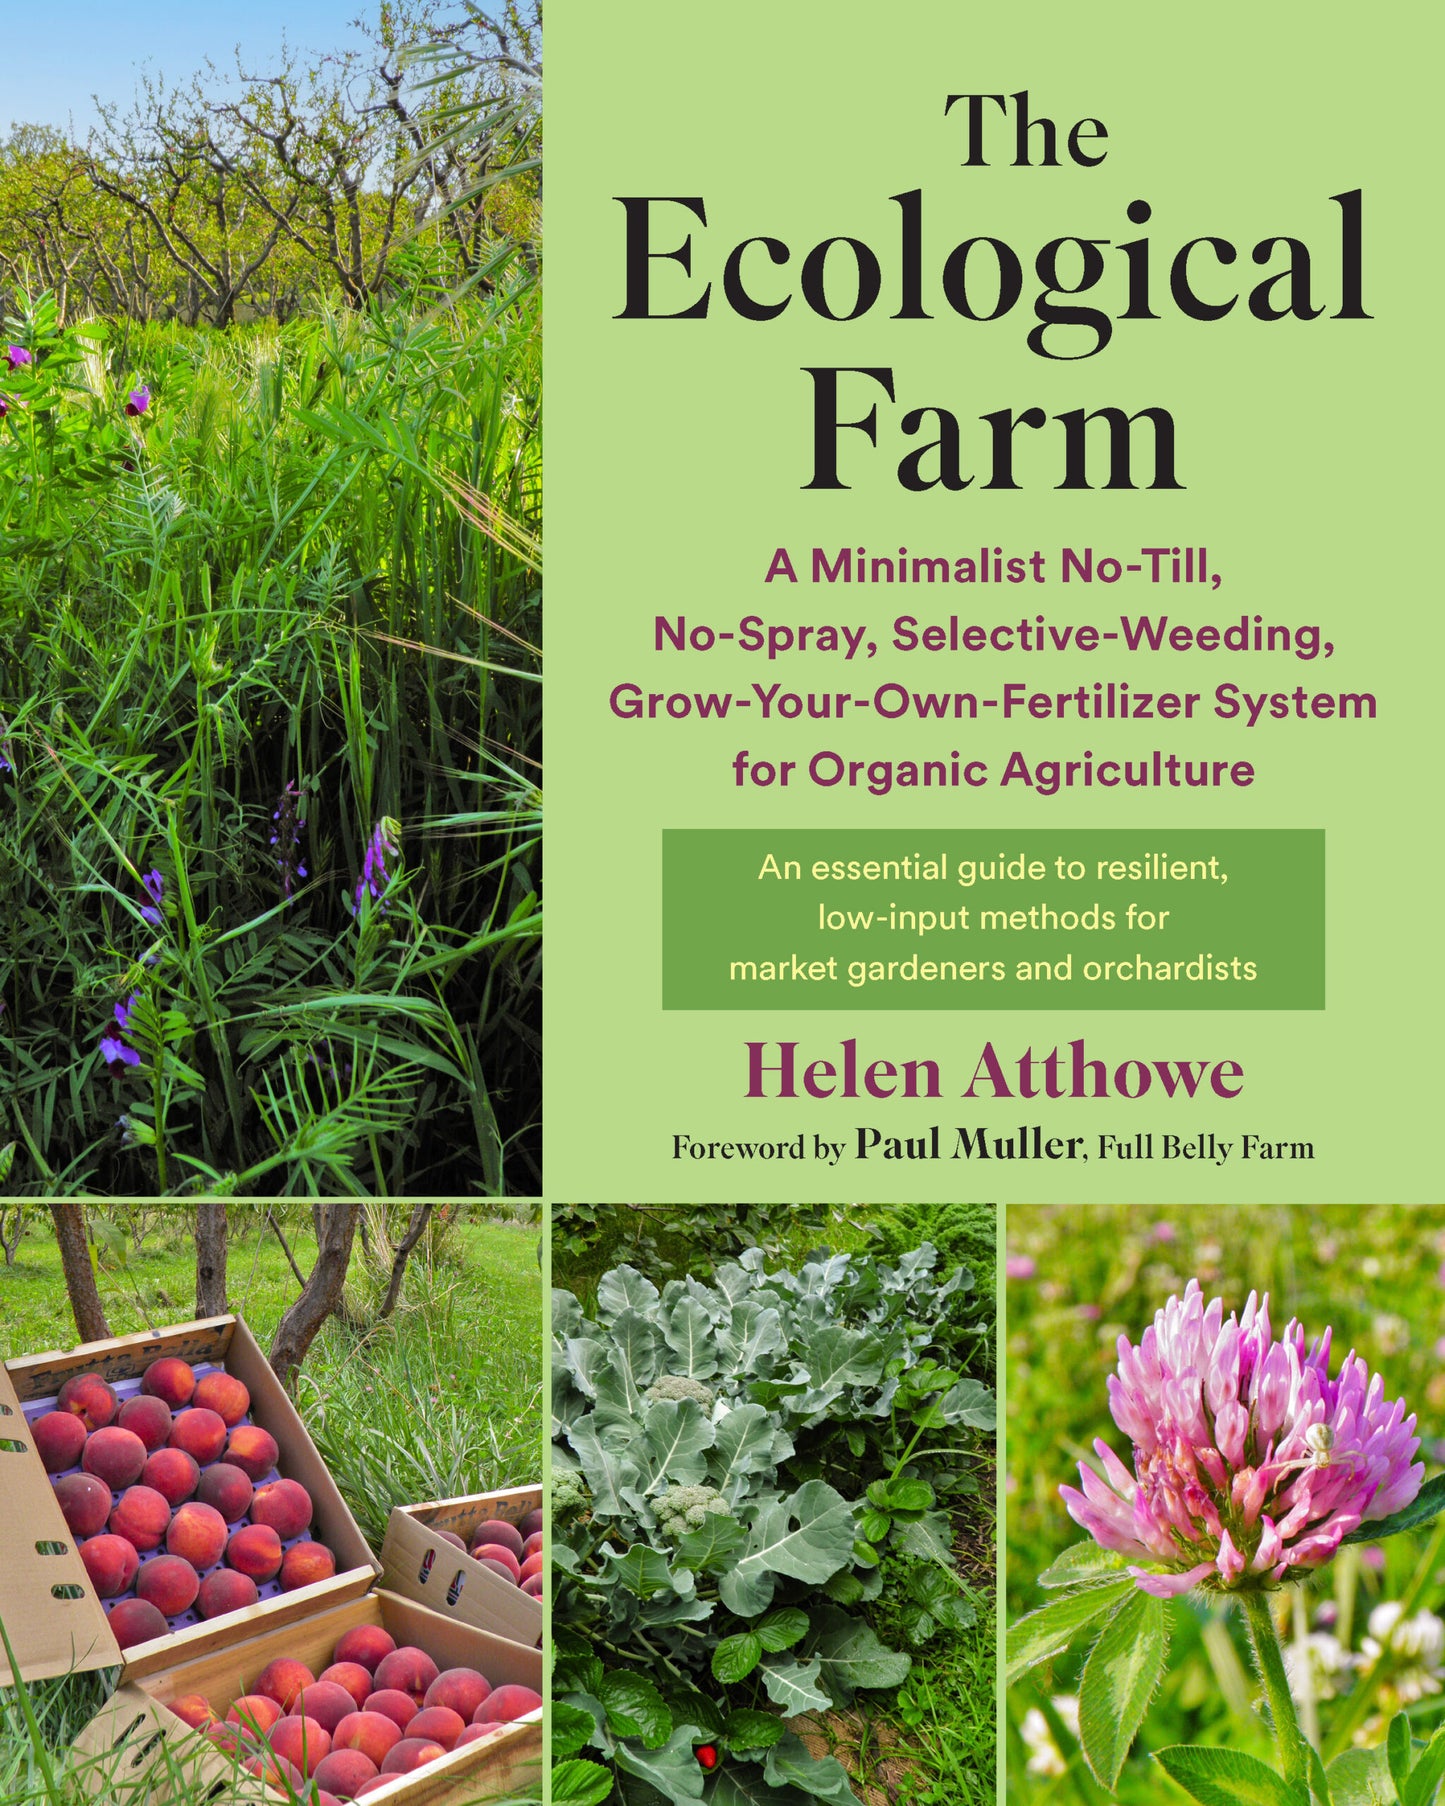 The Ecological Farm by Helen Atthowe